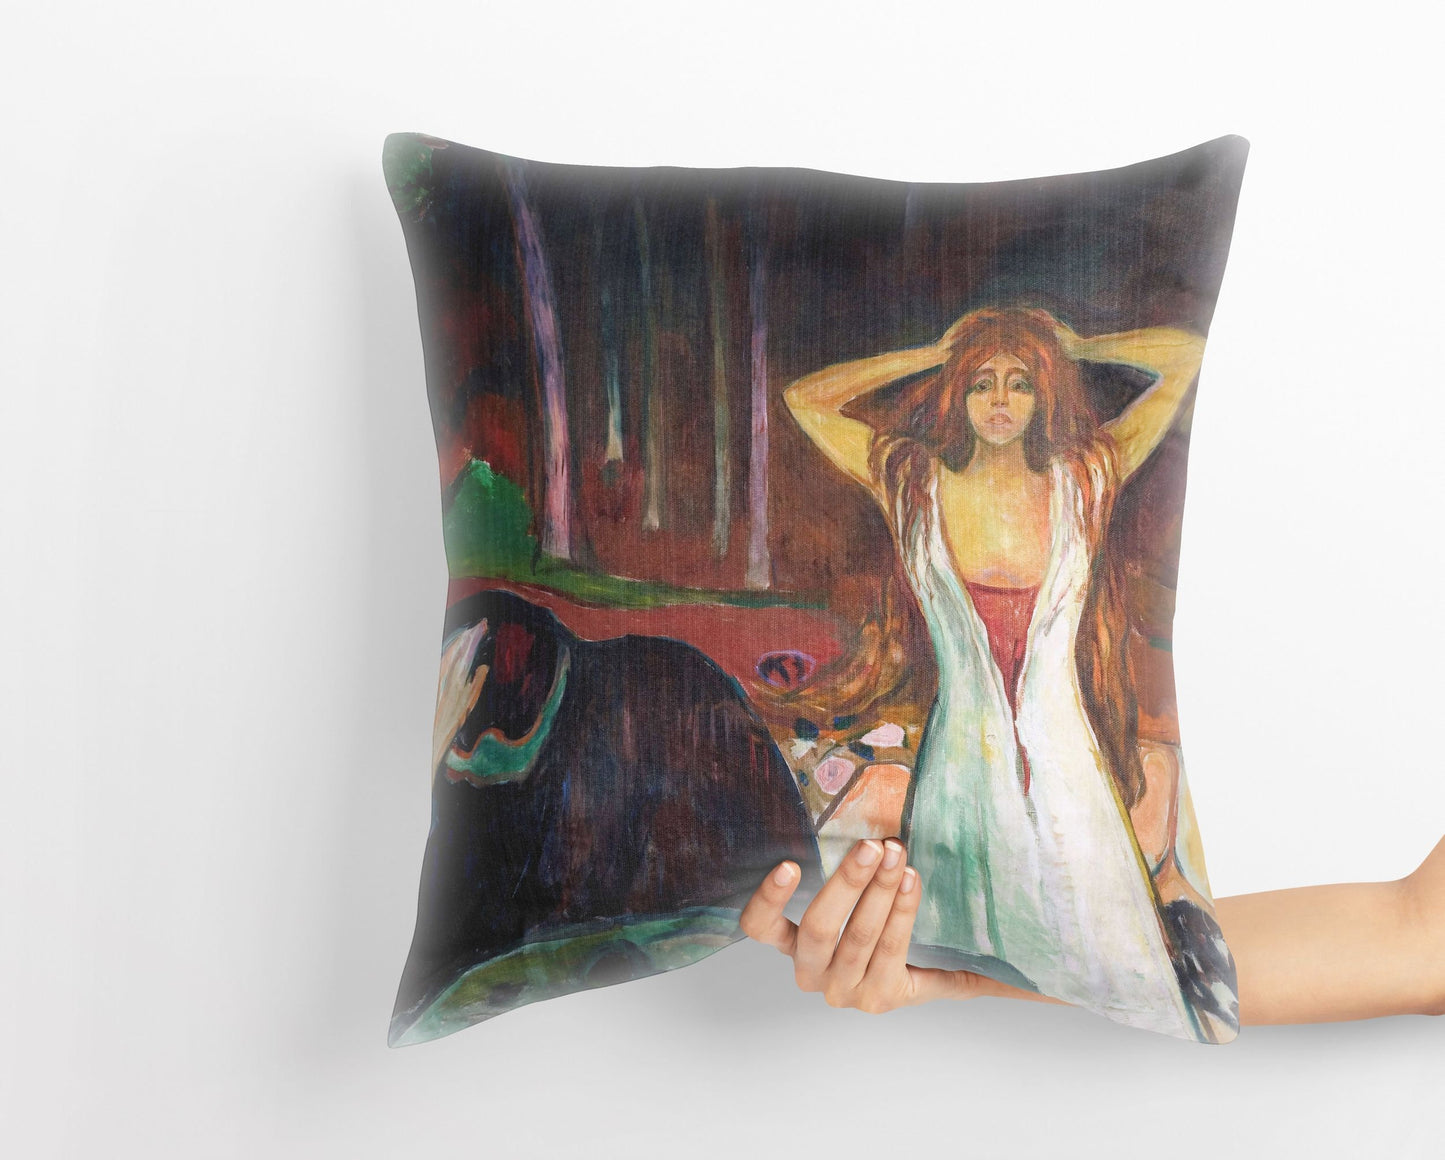 Edvard Munch Famous Art Ashes, Tapestry Pillows, Abstract Throw Pillow Cover, Artist Pillow, Black, Expressionist Pillow, Square Pillow